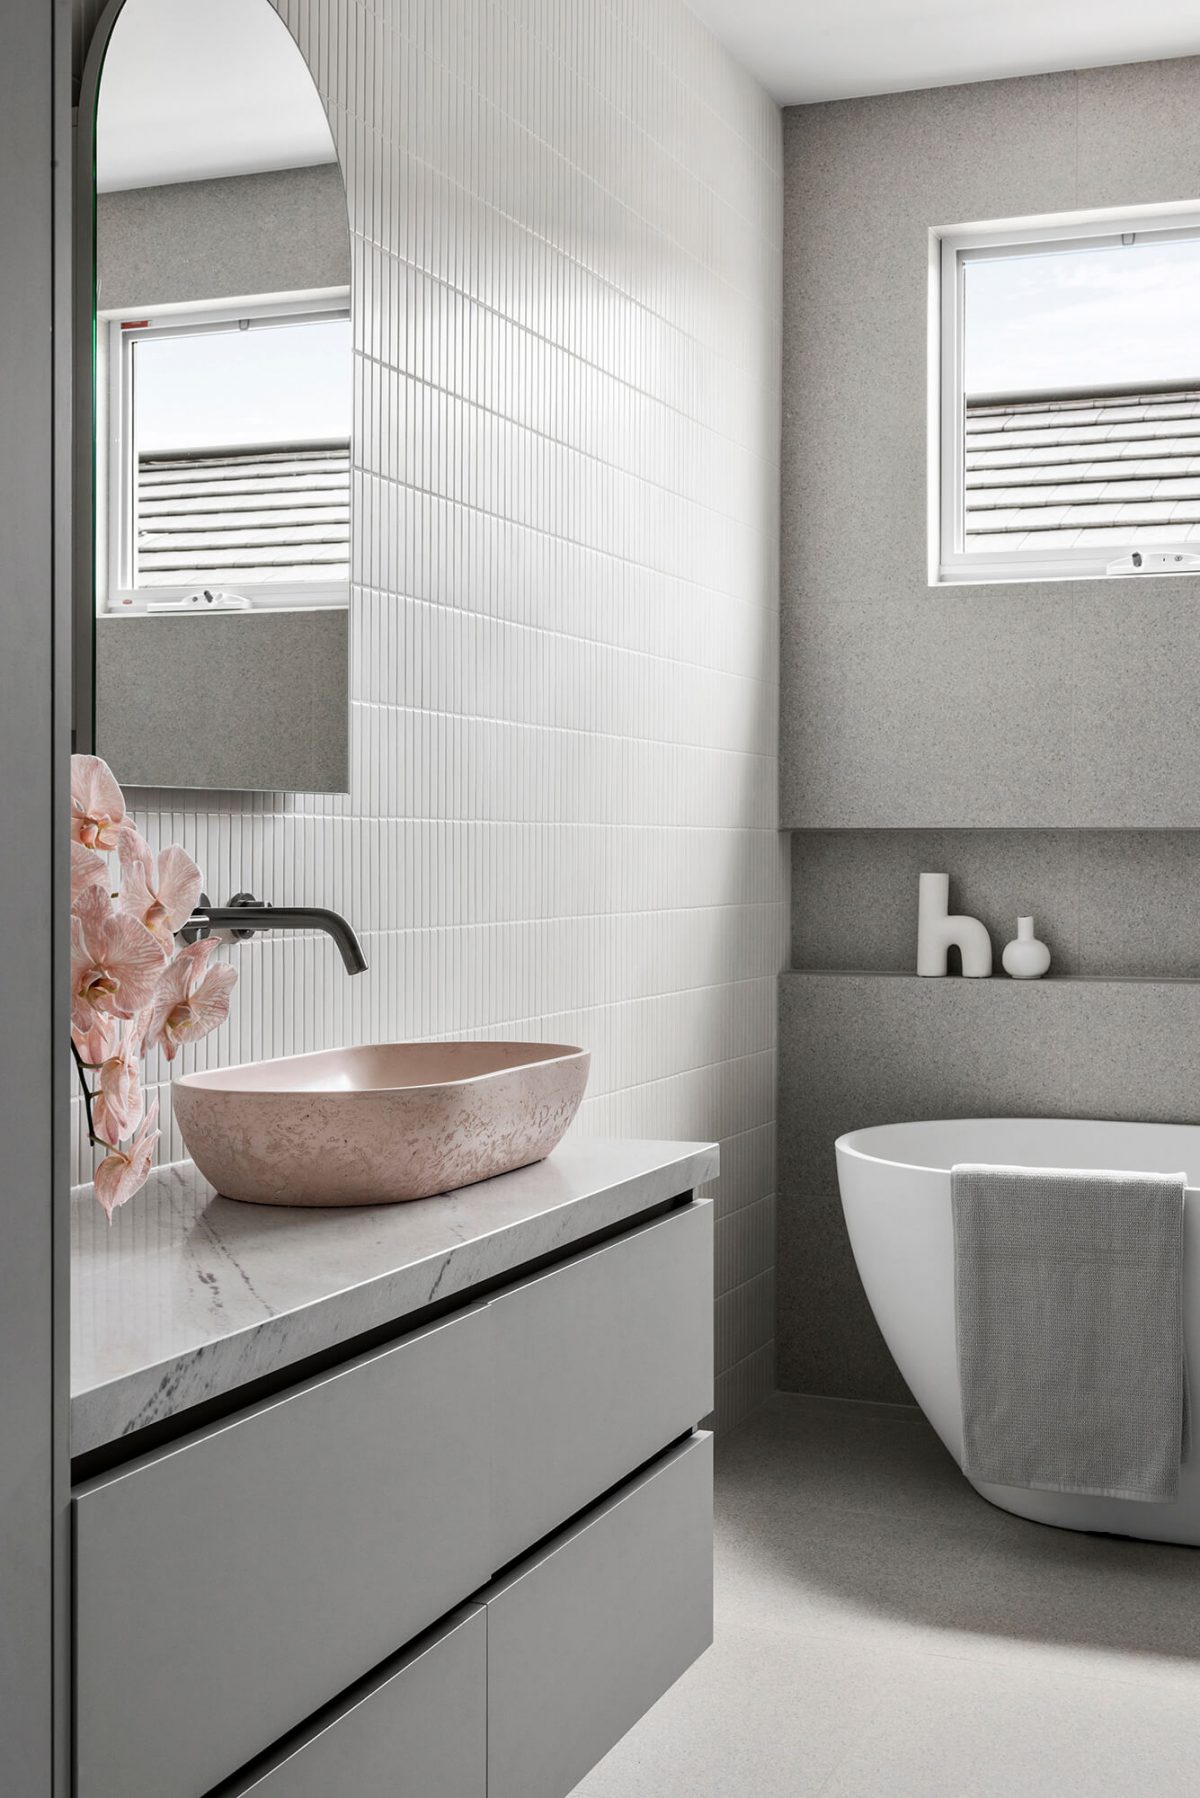 Bathroom renovation Brighton, Melbourne - free-standing bath, walk-in shower, in wall niche, kitkat feature wall, custom joinery, pink concrete basin, arch mirror, wall sconces, linen cabinet, terrazzo tile